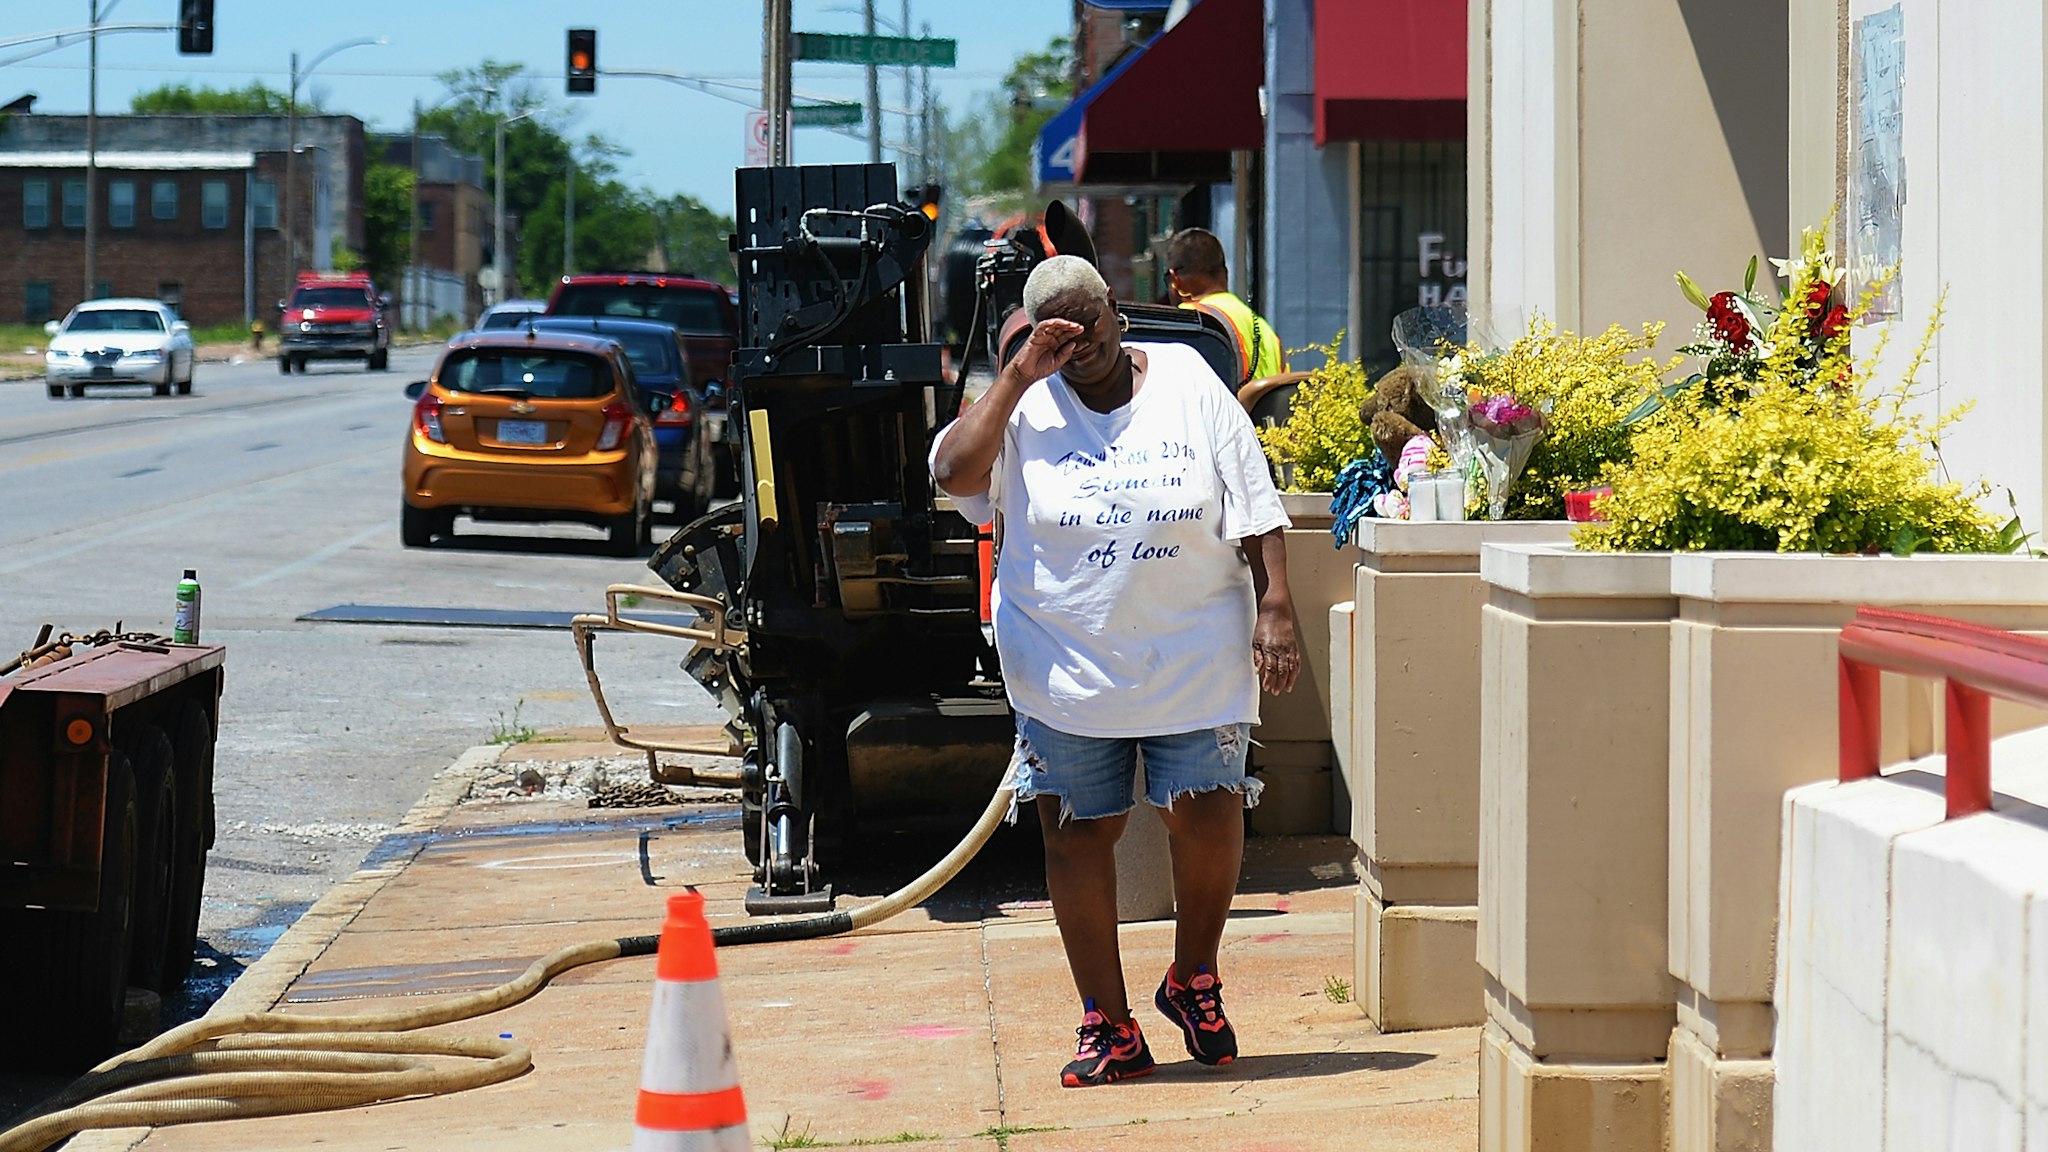 ST LOUIS, MO - JUNE 2: Diane Davis of St. Louis stops to leave flowers and pay respects to David Dorn, a 77-year-old retired police captain who was murdered during overnight rioting outside Lee's Pawn and Jewelry, on June 2, 2020 in St Louis, Missouri. Four police officers were reportedly shot in St. Louis overnight during violent clashes with protesters leading to looting and damage to local businesses.